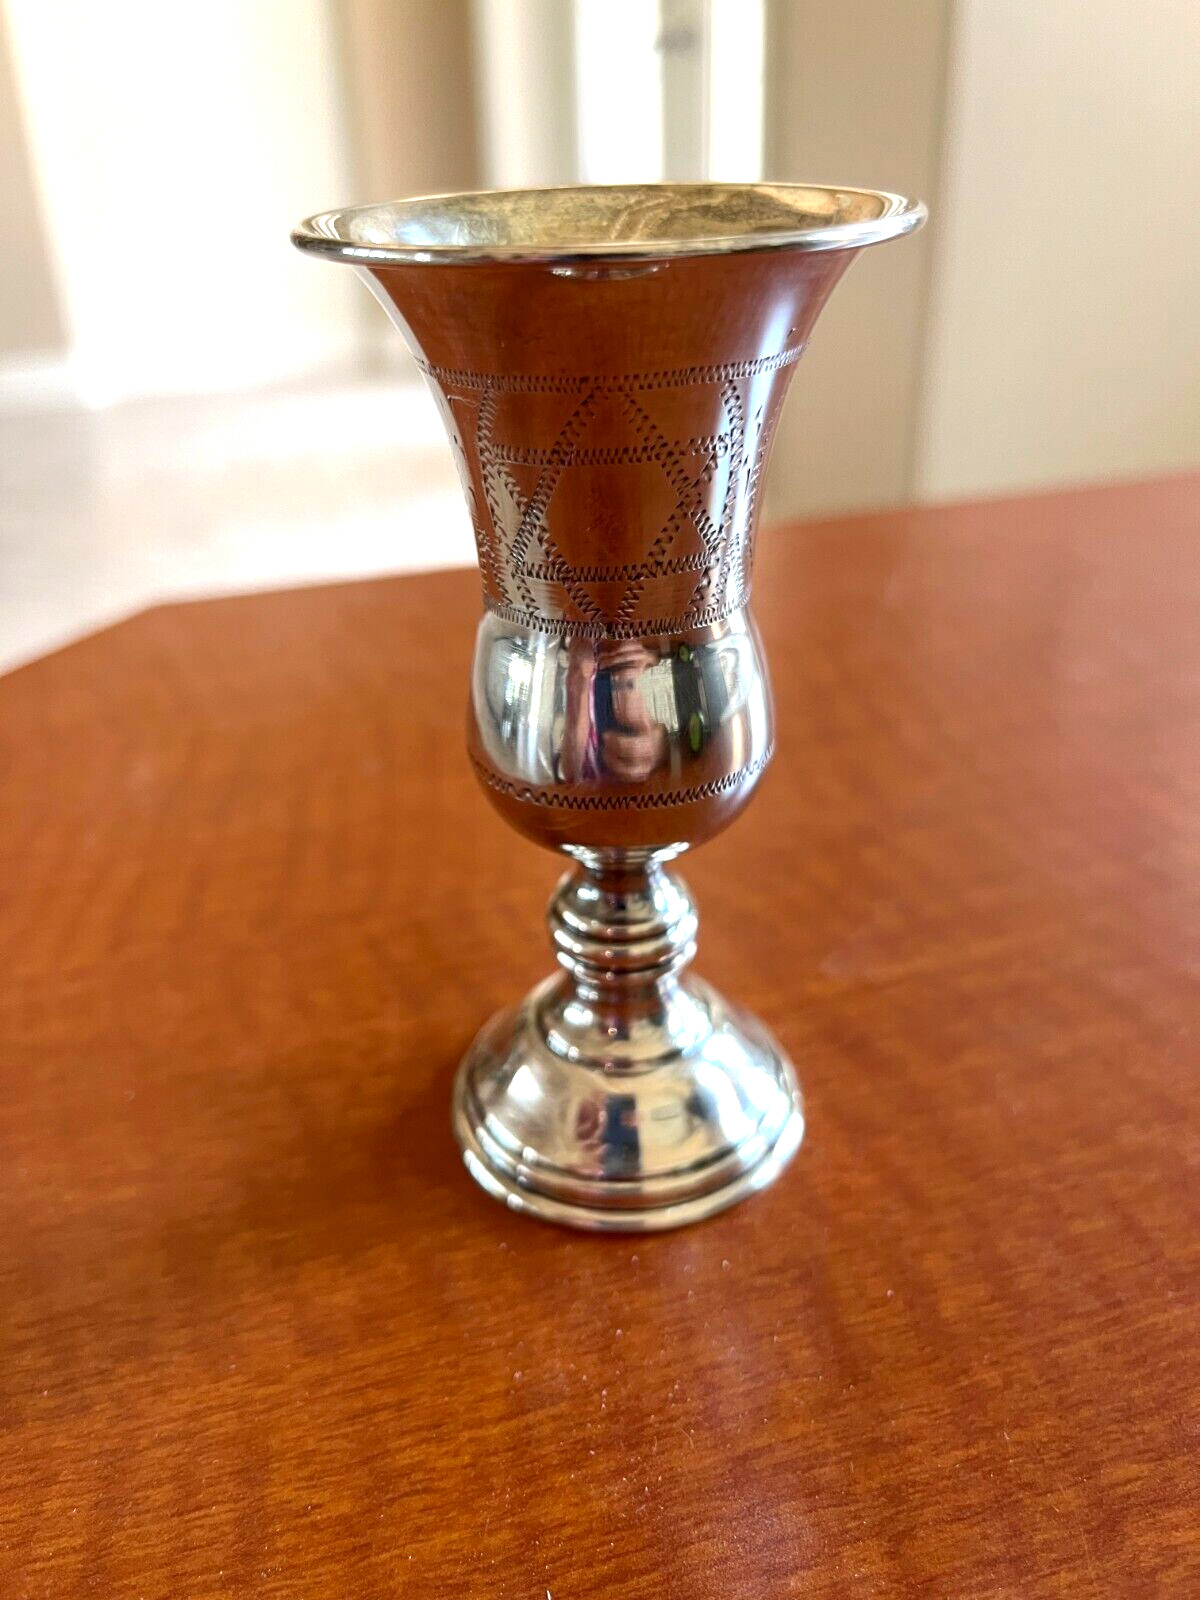 VTG SILVERPLATE JUDAICA KIDDUSH CUP W/ENGRAVED STAR OF DAVID -DATES TO MID-1960s